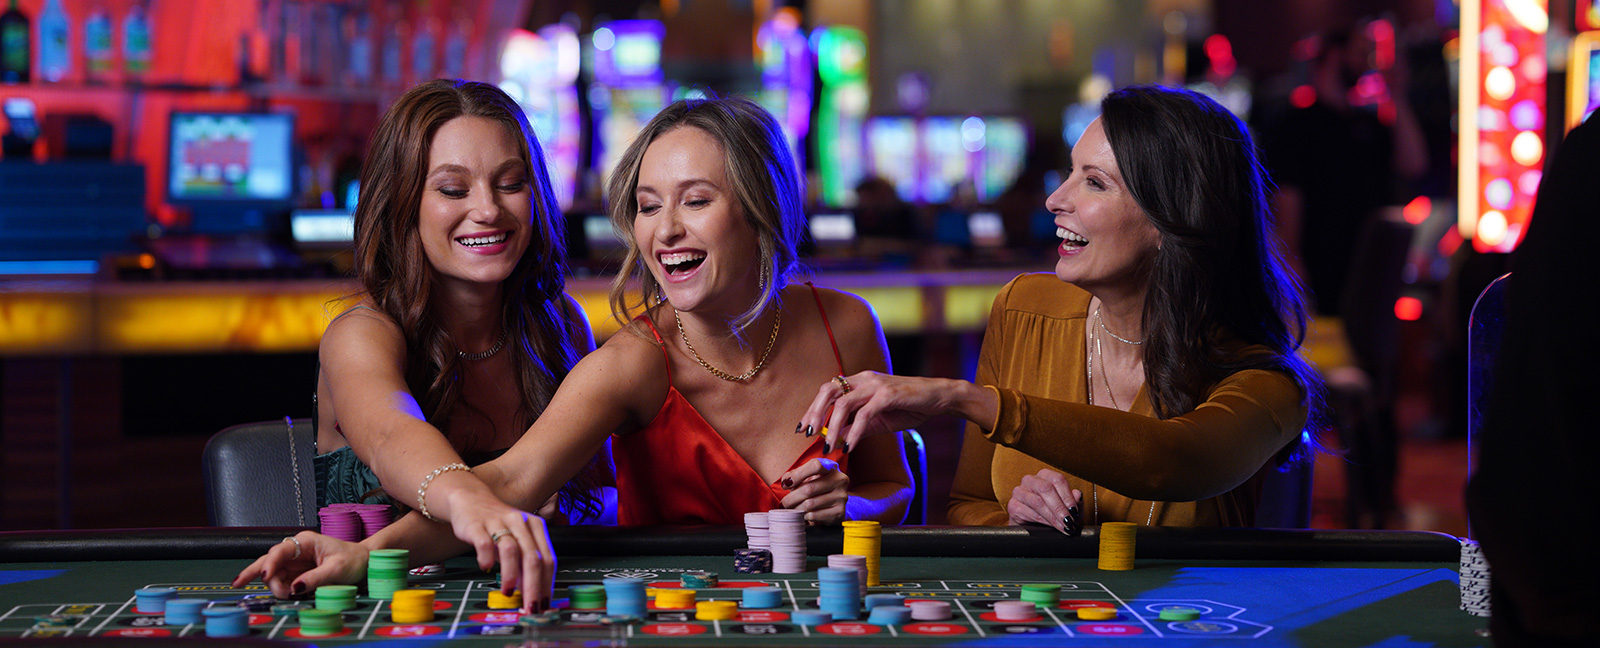 online casino: Do You Really Need It? This Will Help You Decide!